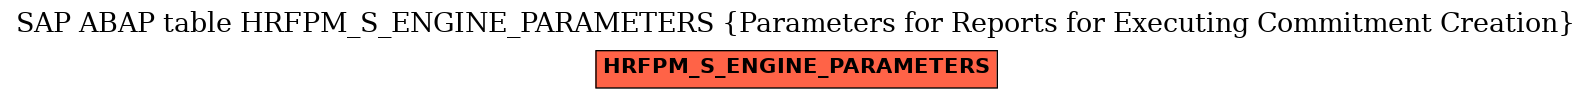 E-R Diagram for table HRFPM_S_ENGINE_PARAMETERS (Parameters for Reports for Executing Commitment Creation)